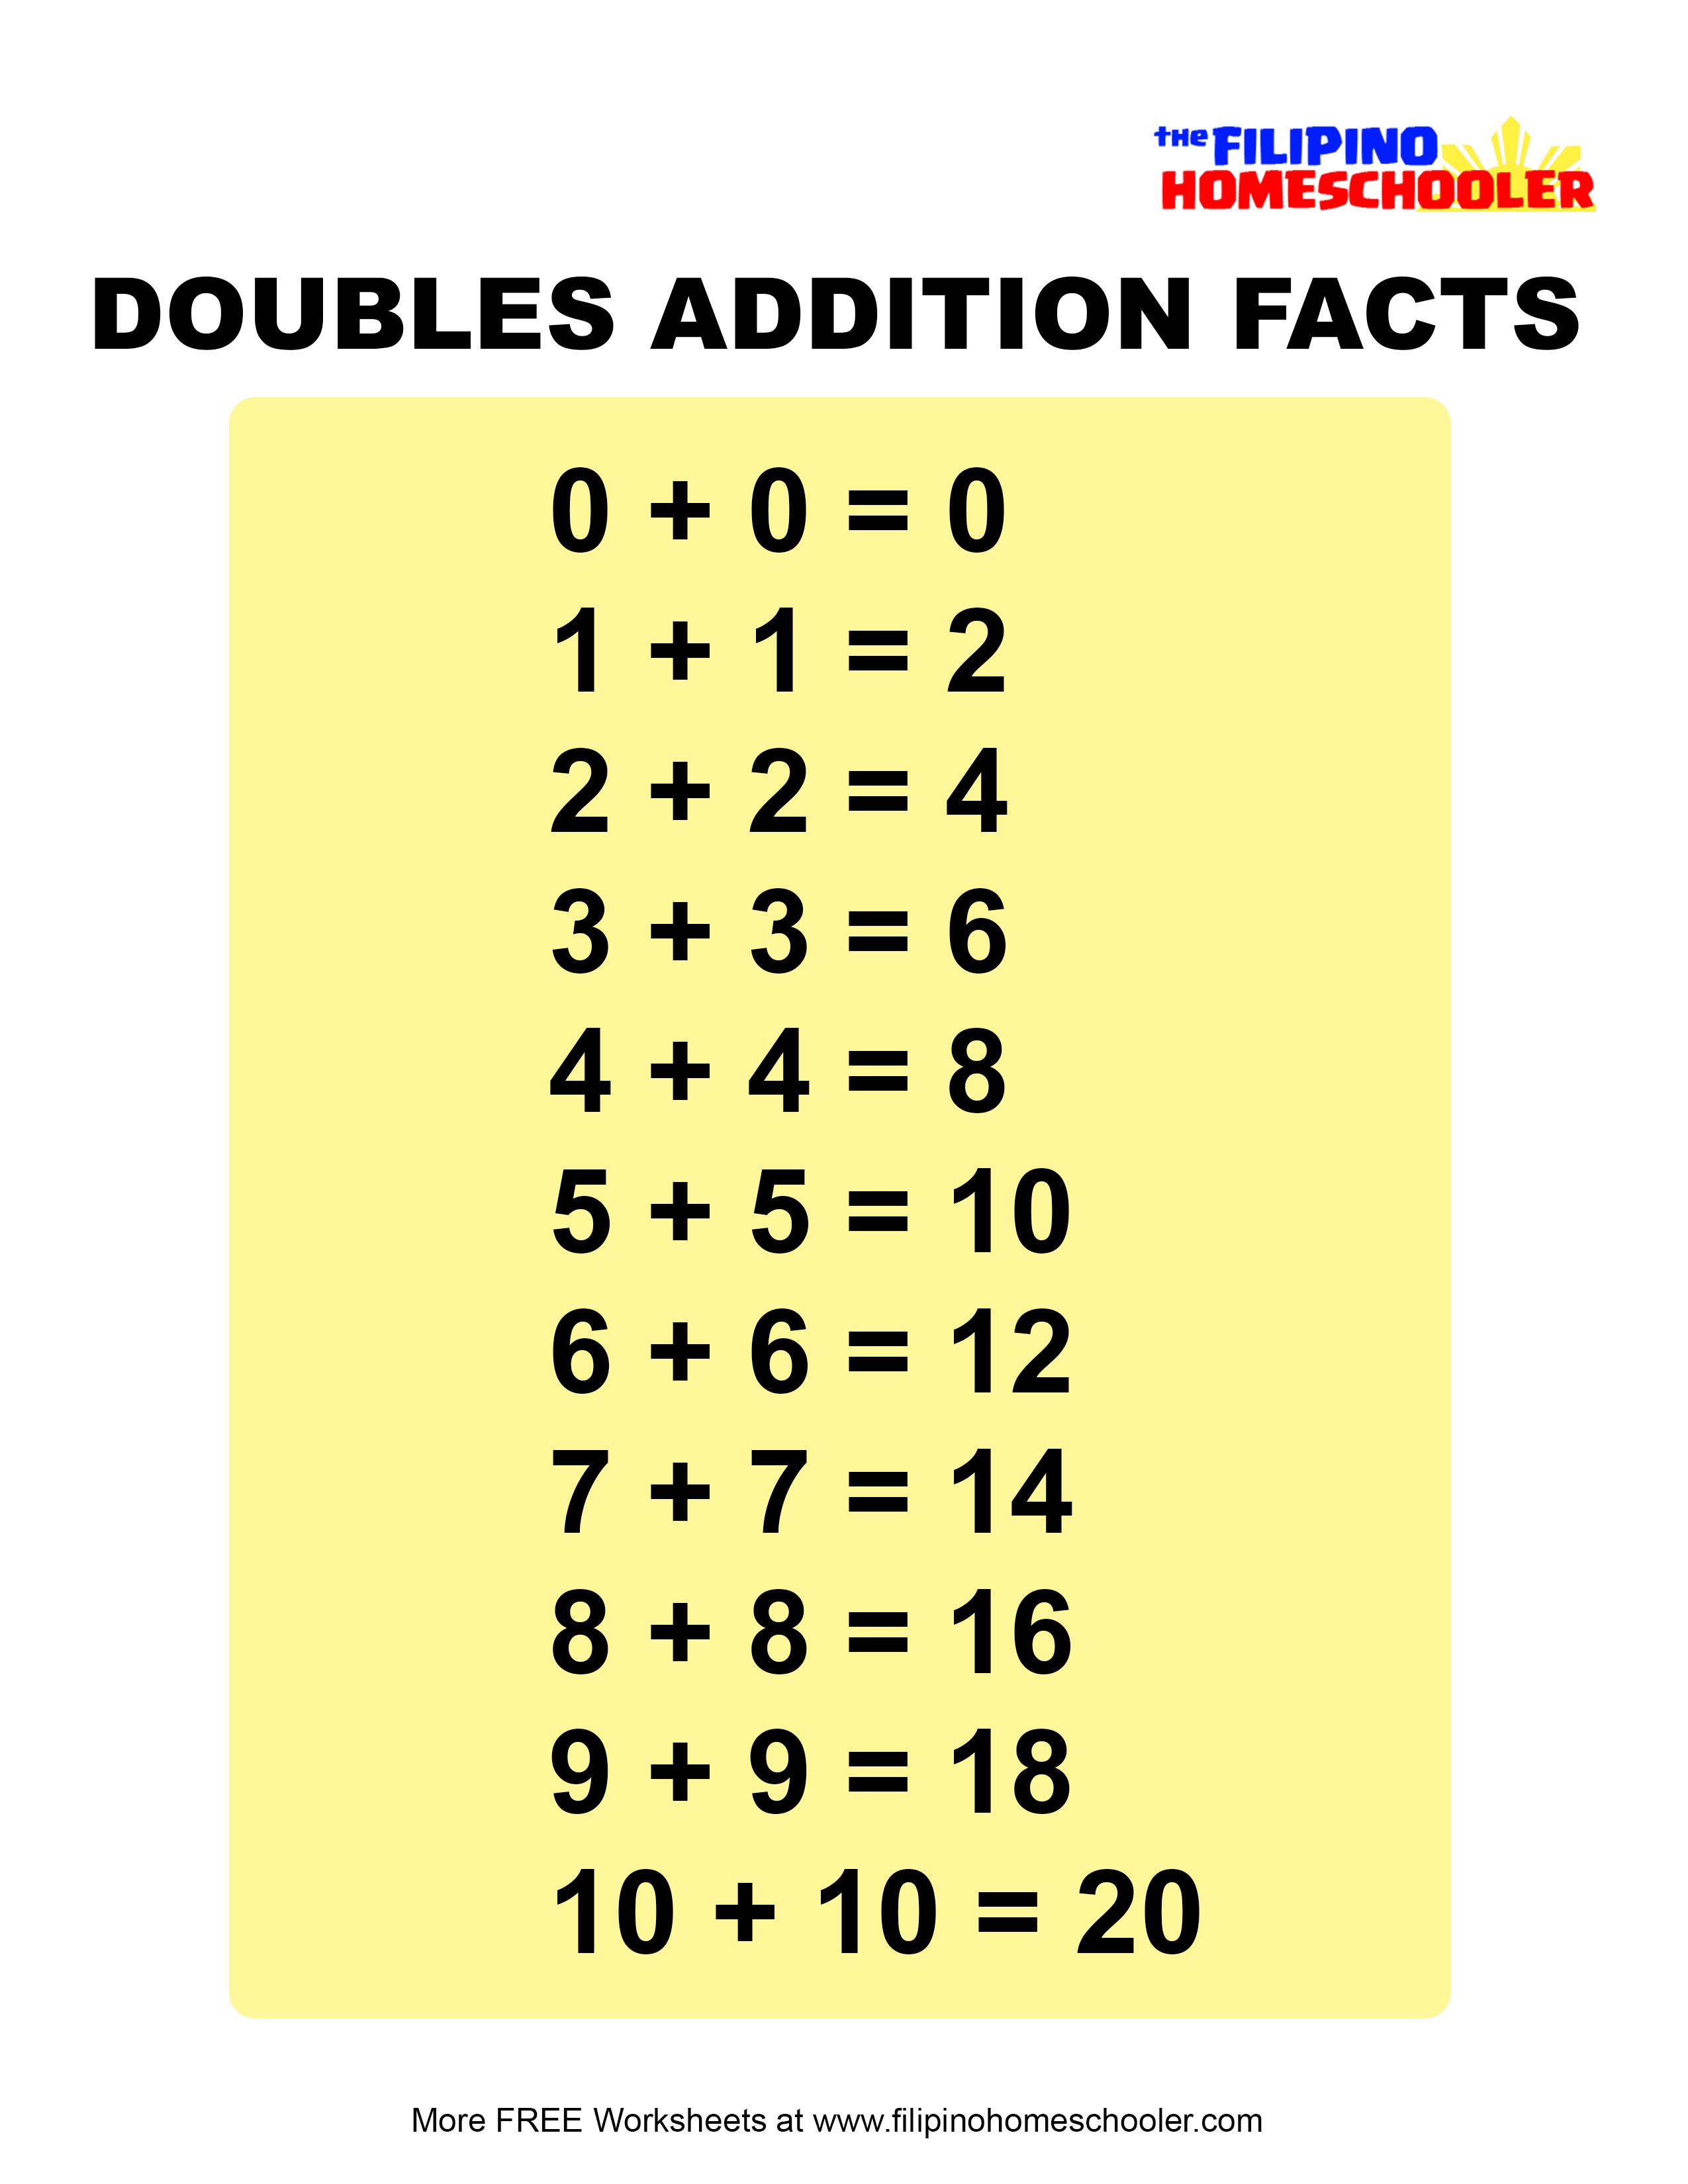 Adding Doubles Worksheet 2nd Grade Adding Doubles Worksheets and Teaching Strategies — the